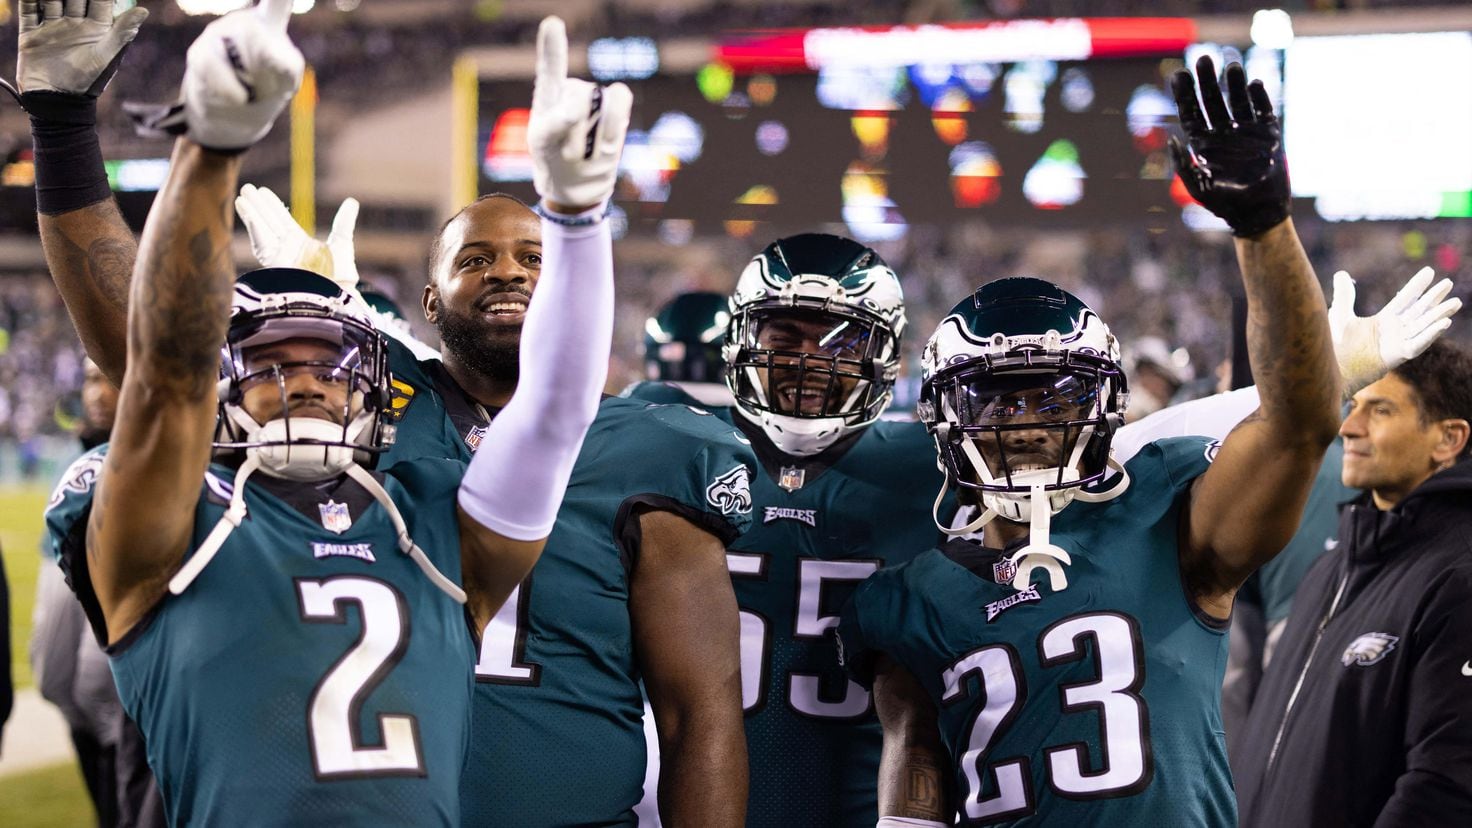 Eagles win NFC Championship and are going to Super Bowl LVII